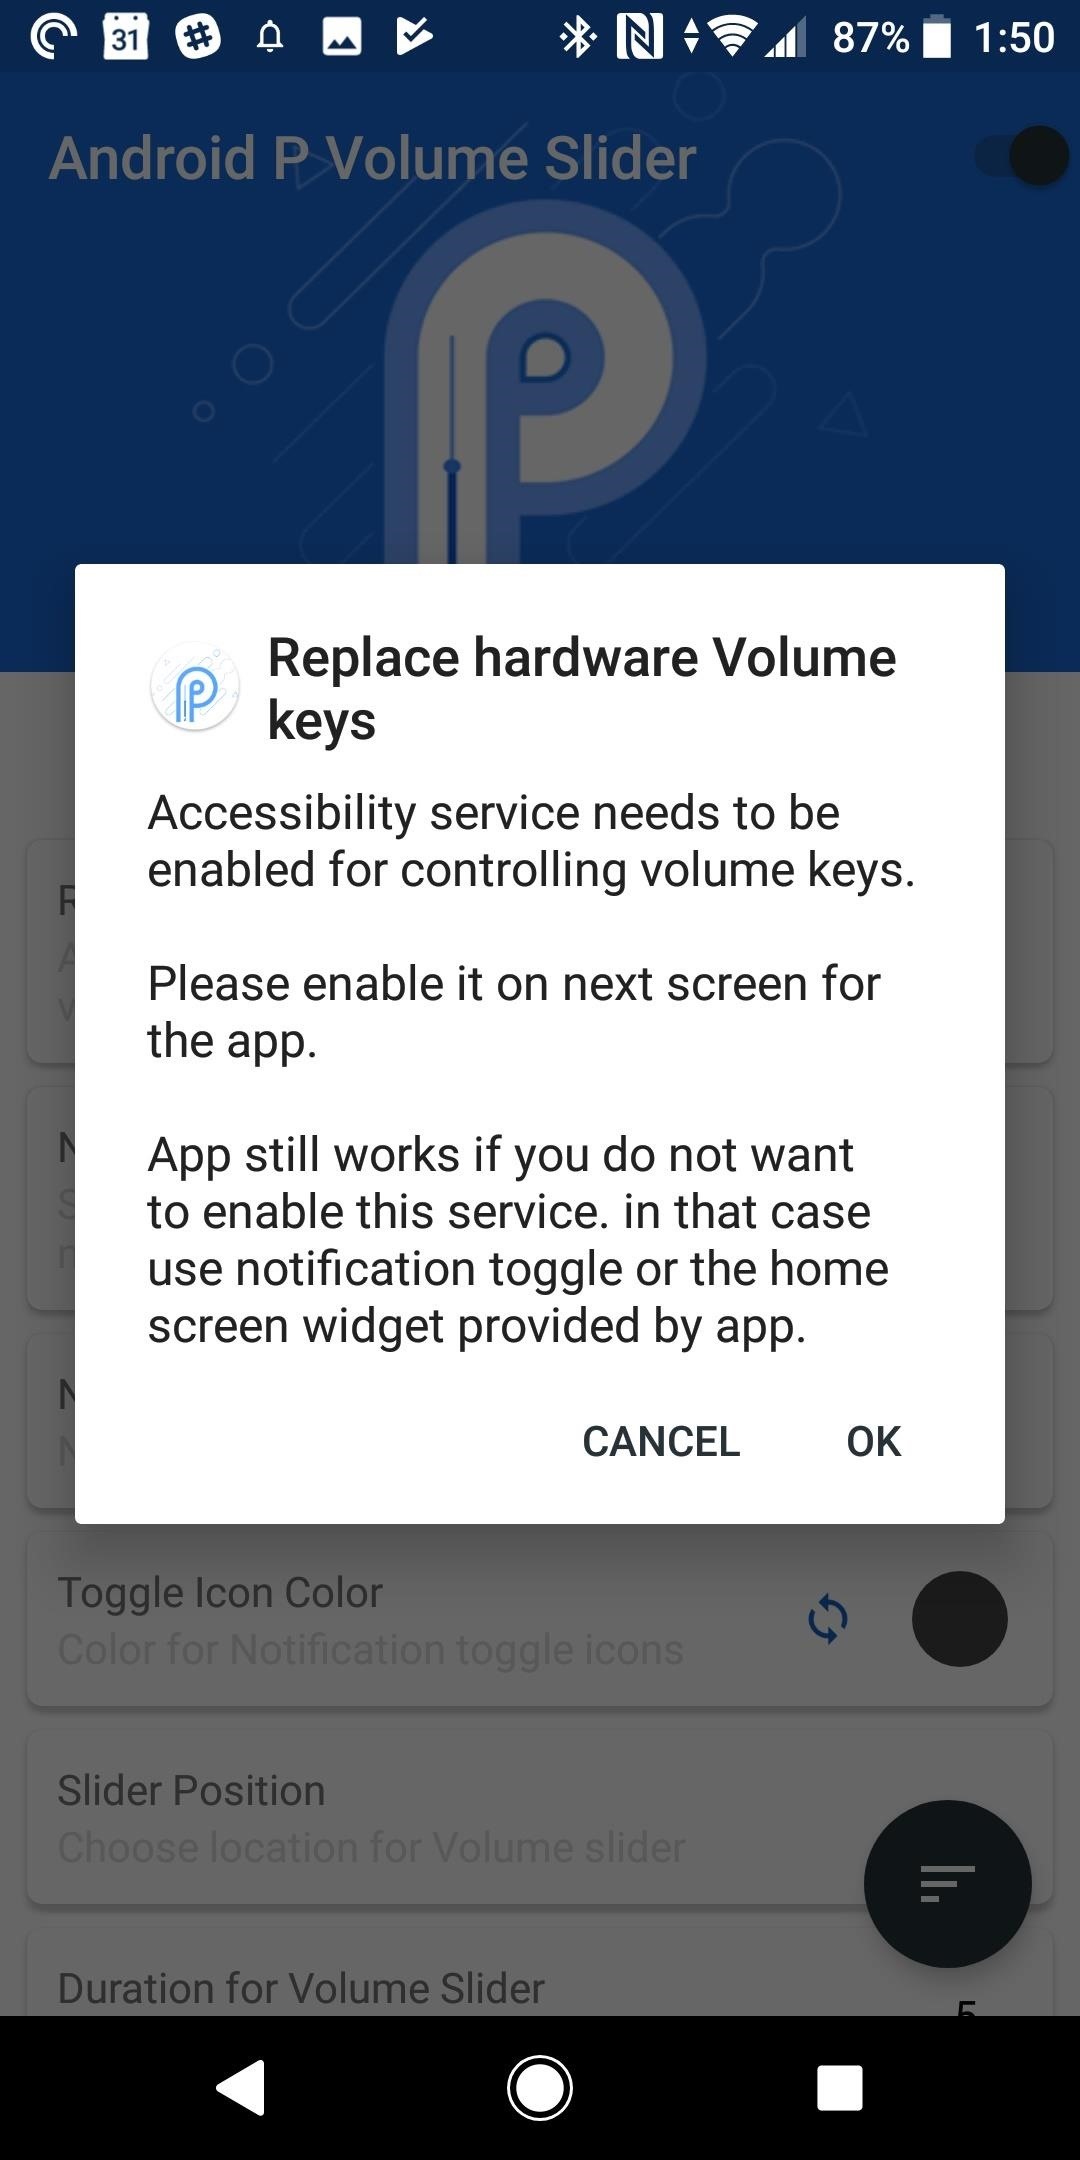 Get Android 9.0 Pie's Volume Slider on Any Phone & Control Media Volume by Default